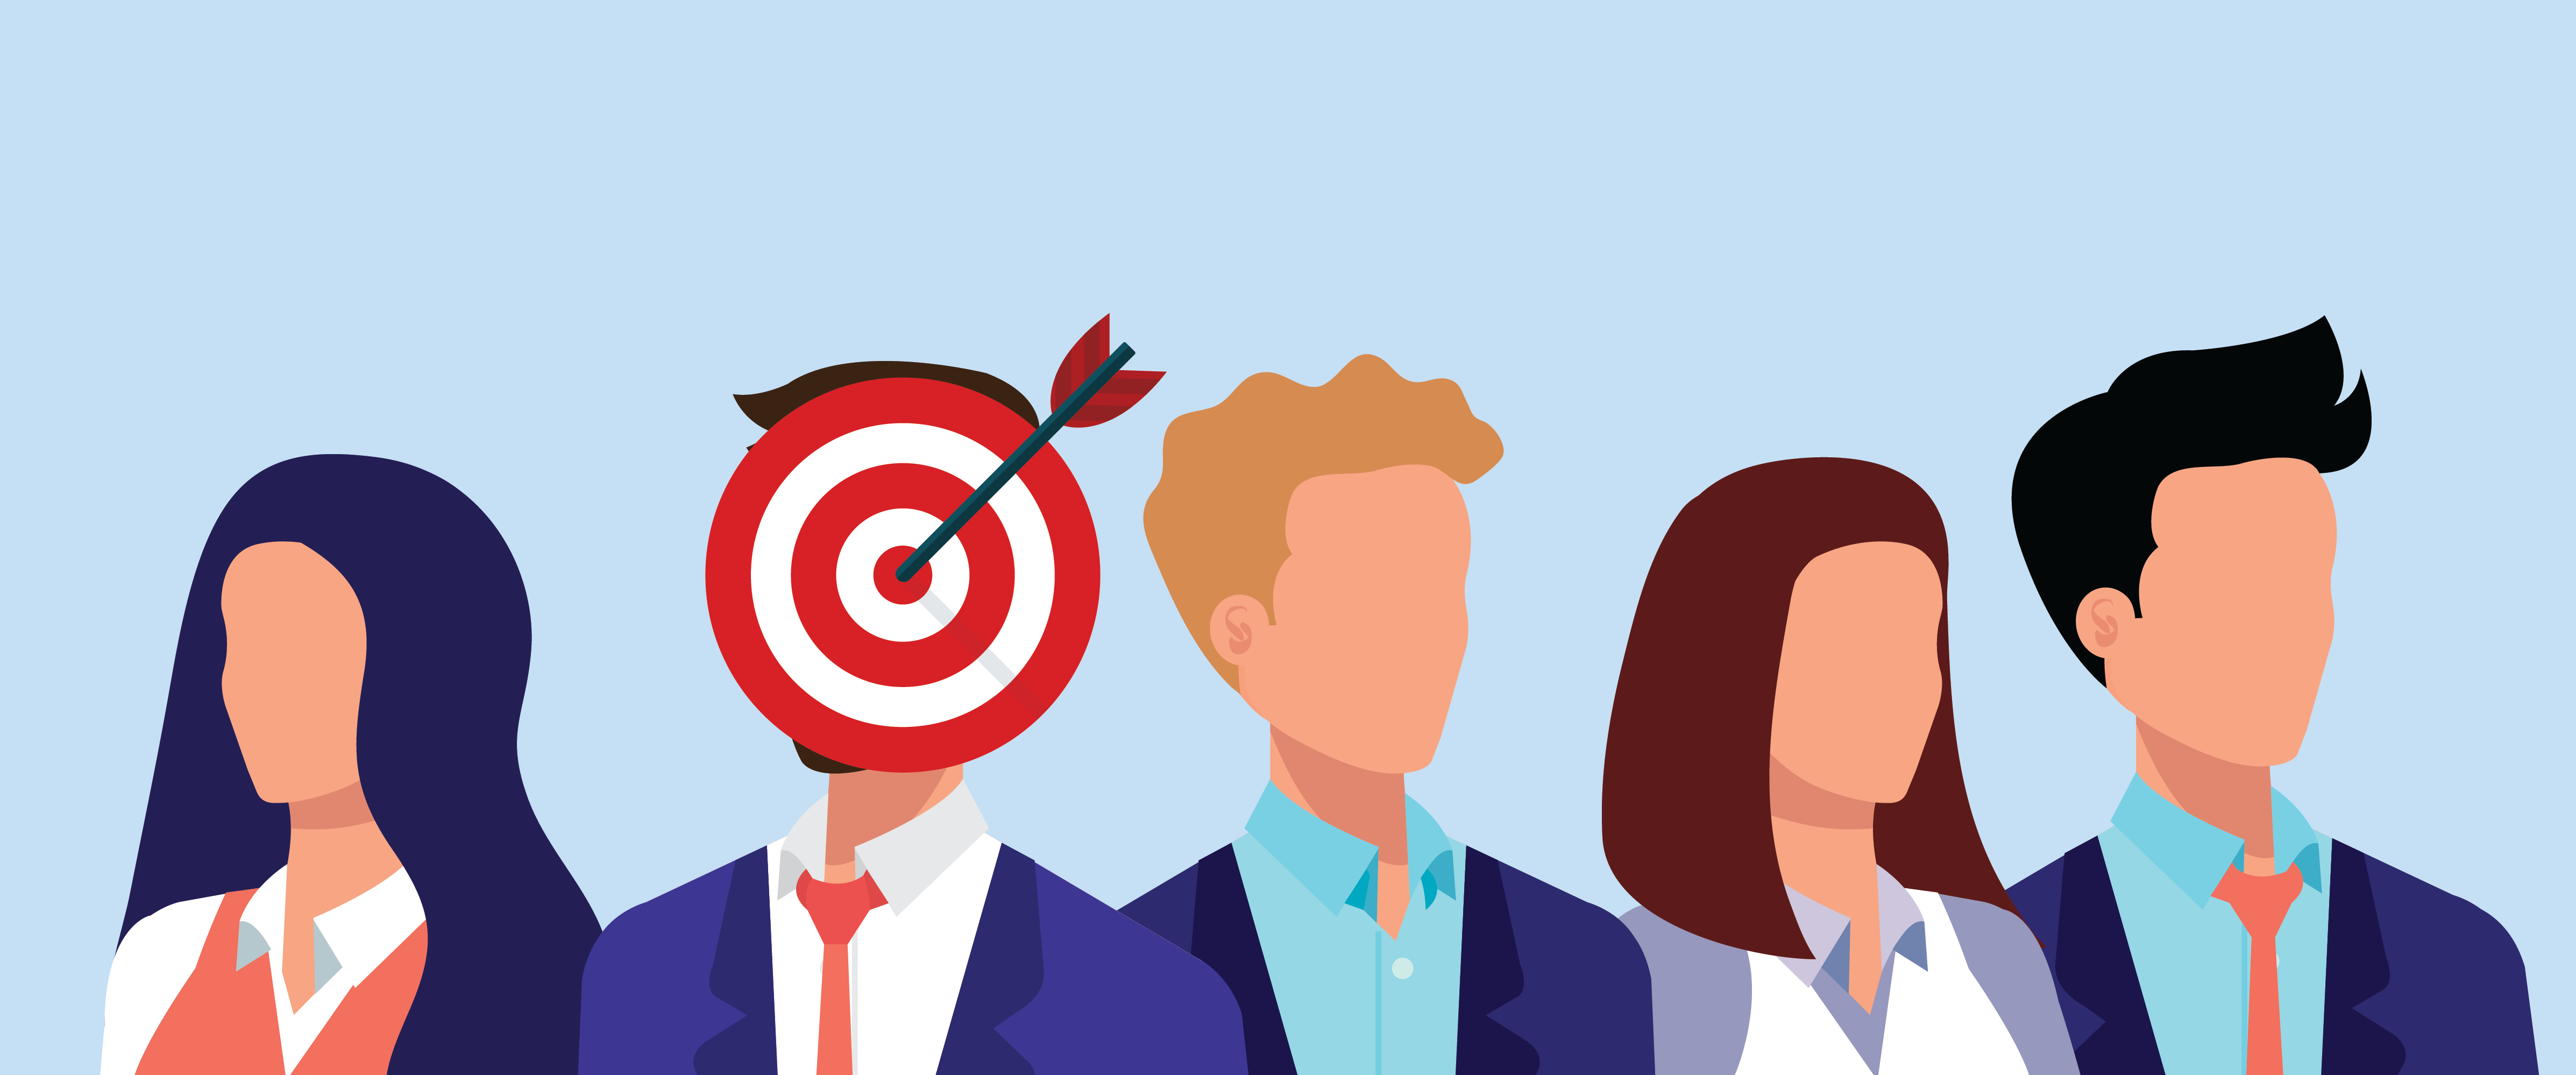 Reaching your potential customer starts with identifying your target group 